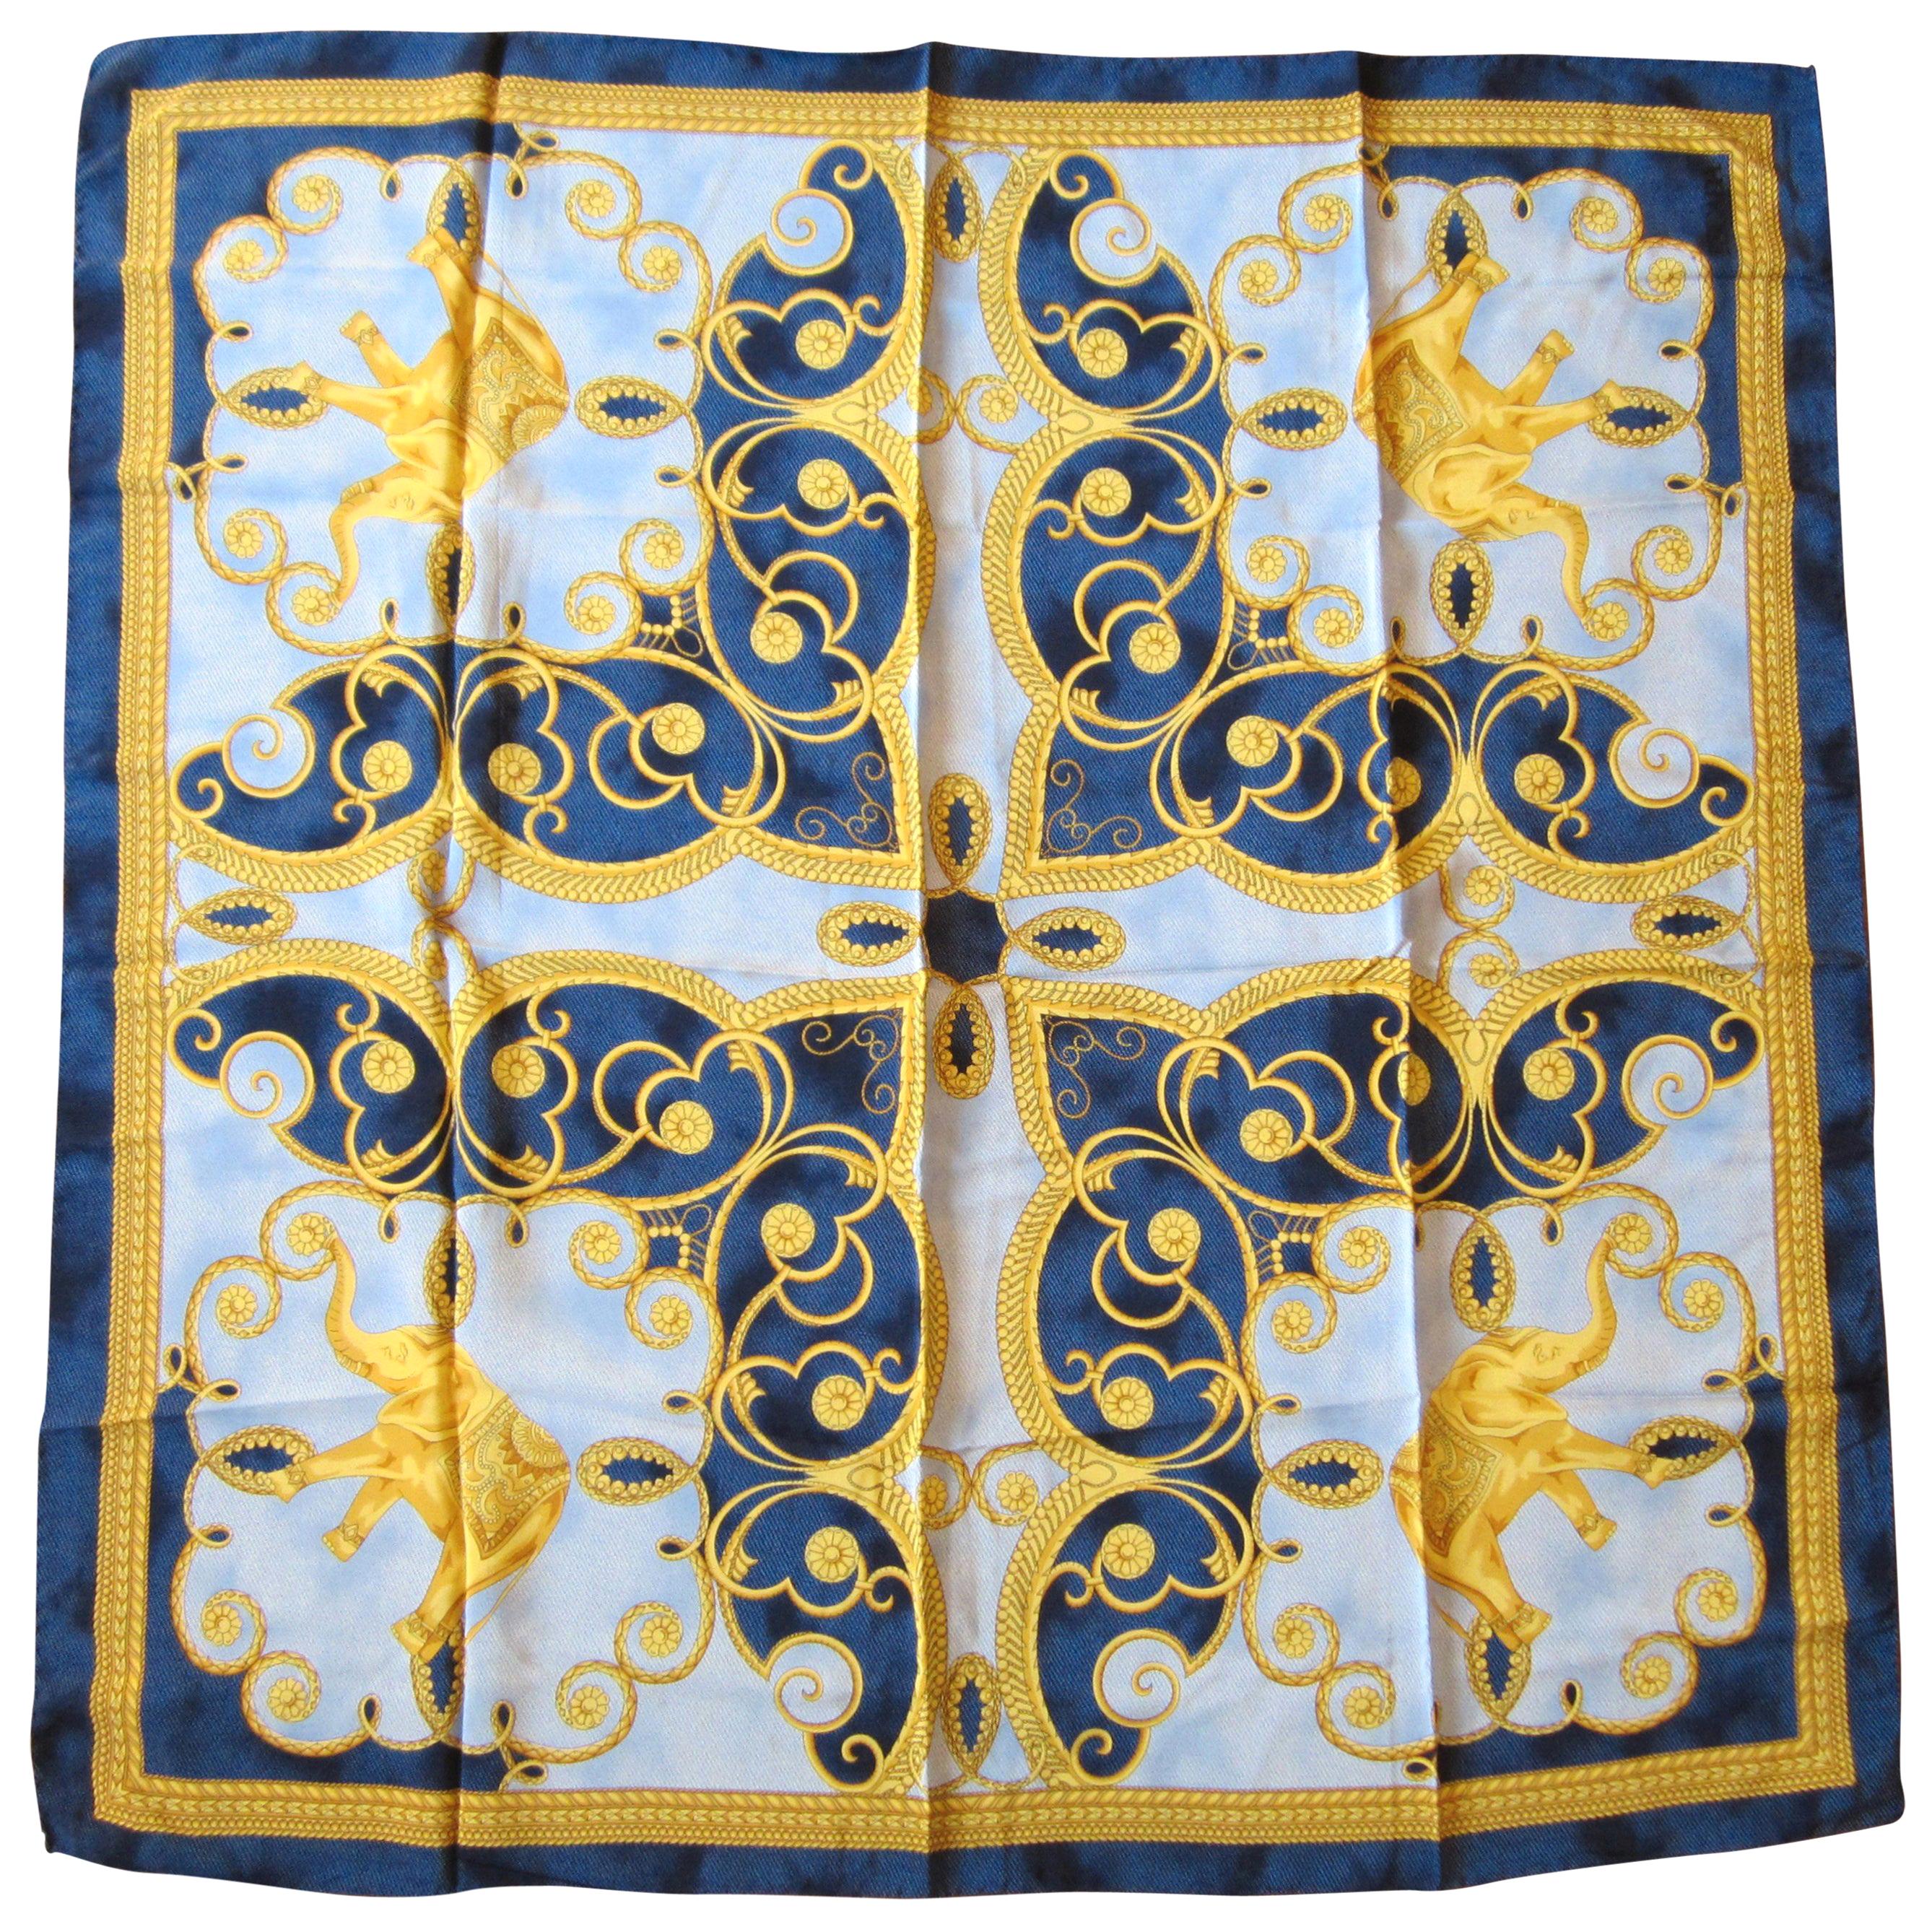  Escada Scarf Silk Blue Elephant Motif Made in Italy, New, Never Worn  For Sale